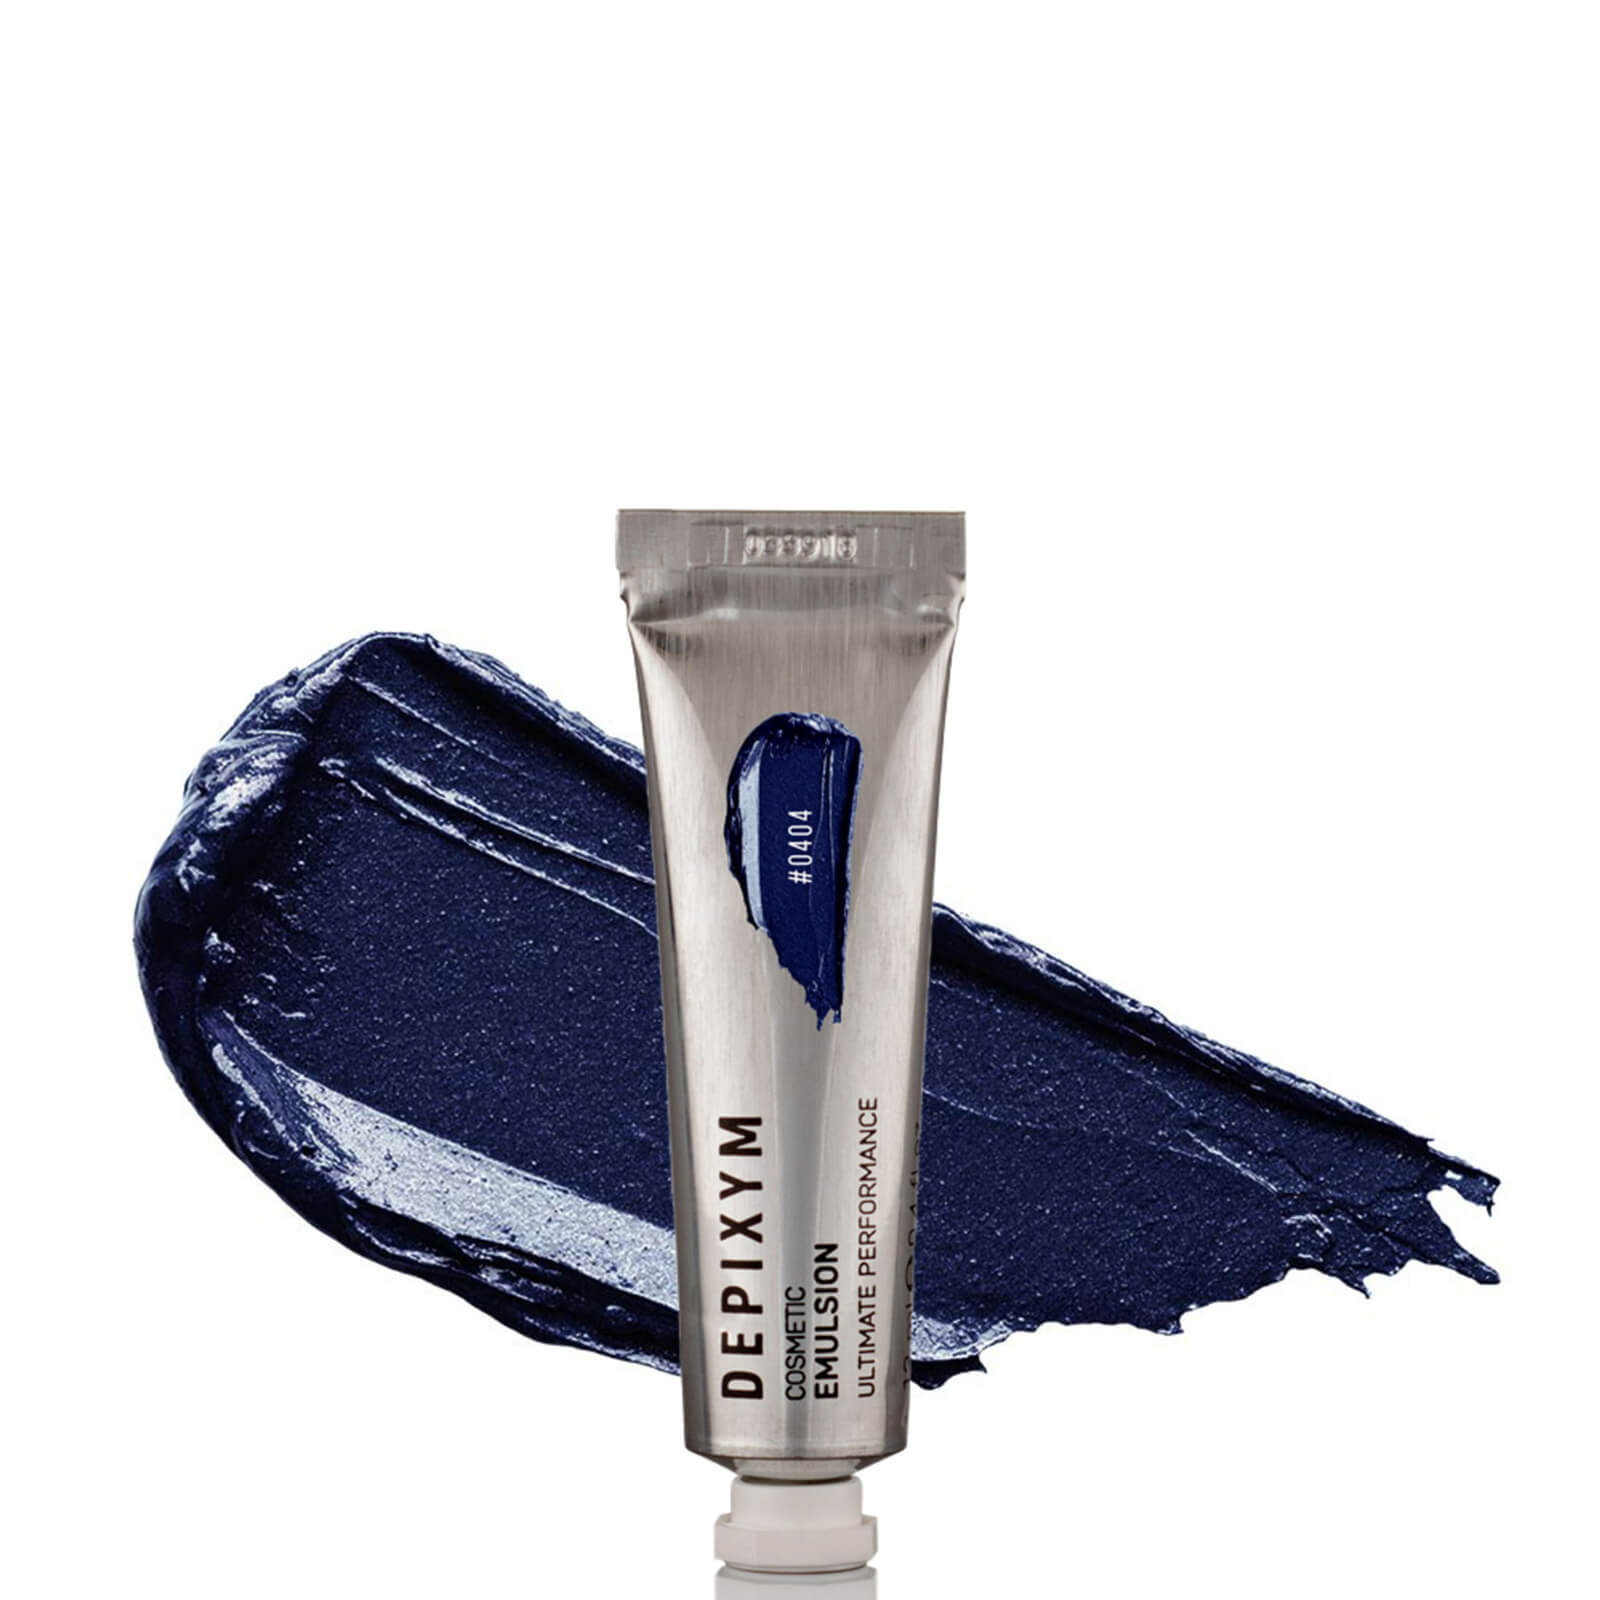 DEPIXYM Cosmetic Emulsion 12ml (Various Shades) - #0404 Navy Blue